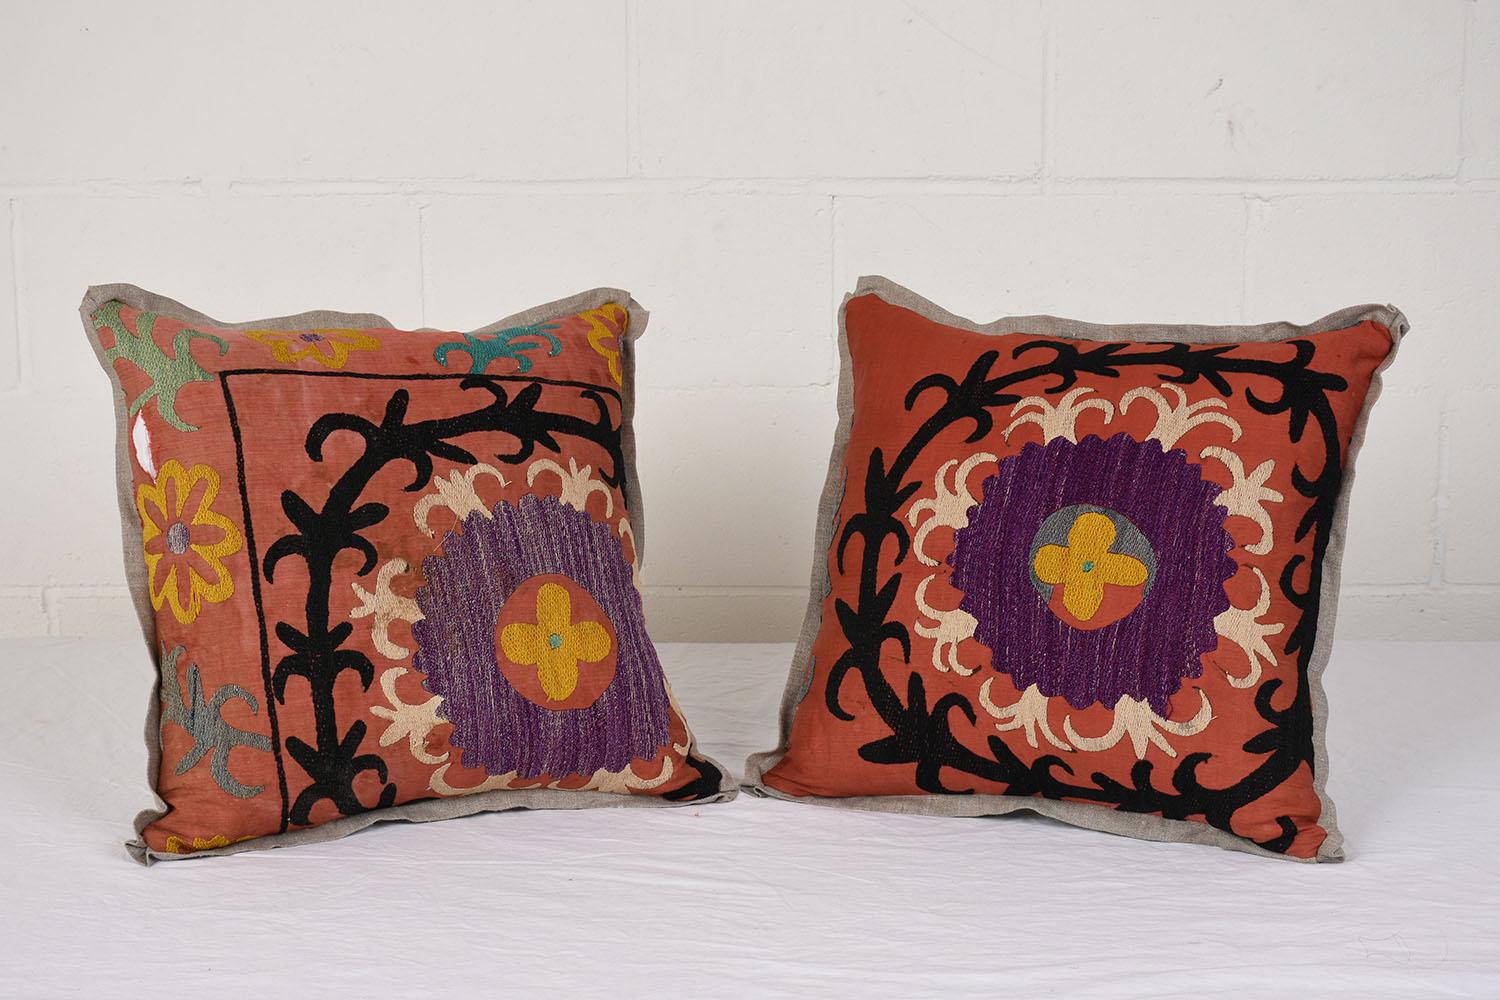 Elevate your interior with our exquisite pair of antique pillows, meticulously crafted from authentic Nim Suzani embroidered textiles. Combined with a neutral sand-colored Belgium linen fabric, these pillows blend antique charm with modern